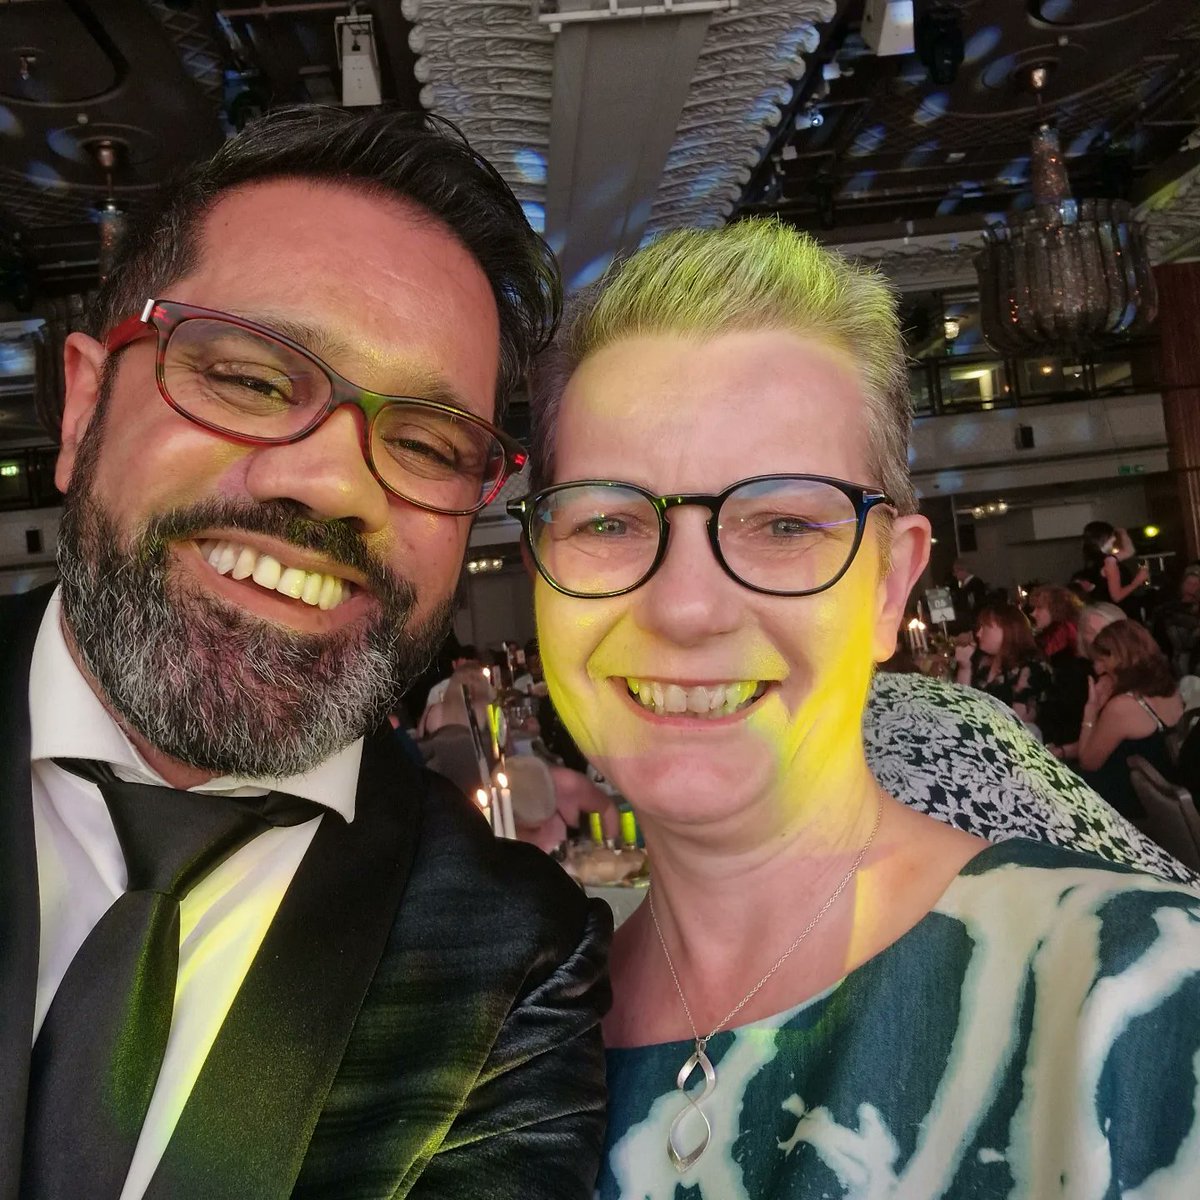 Guess who loved my jacket! #NTAwards @CNOEngland @Crouchendtiger7 We're so proud to be nominated for the Nursing Times Awards 2022 for the catergory of Nursing in the Community @NursingTimes @gurchrandhawa @RCNi_Justin @NinaJaspalCNP @Mandeep_Lally @pthaven1 @AjGidda @SunitaD8